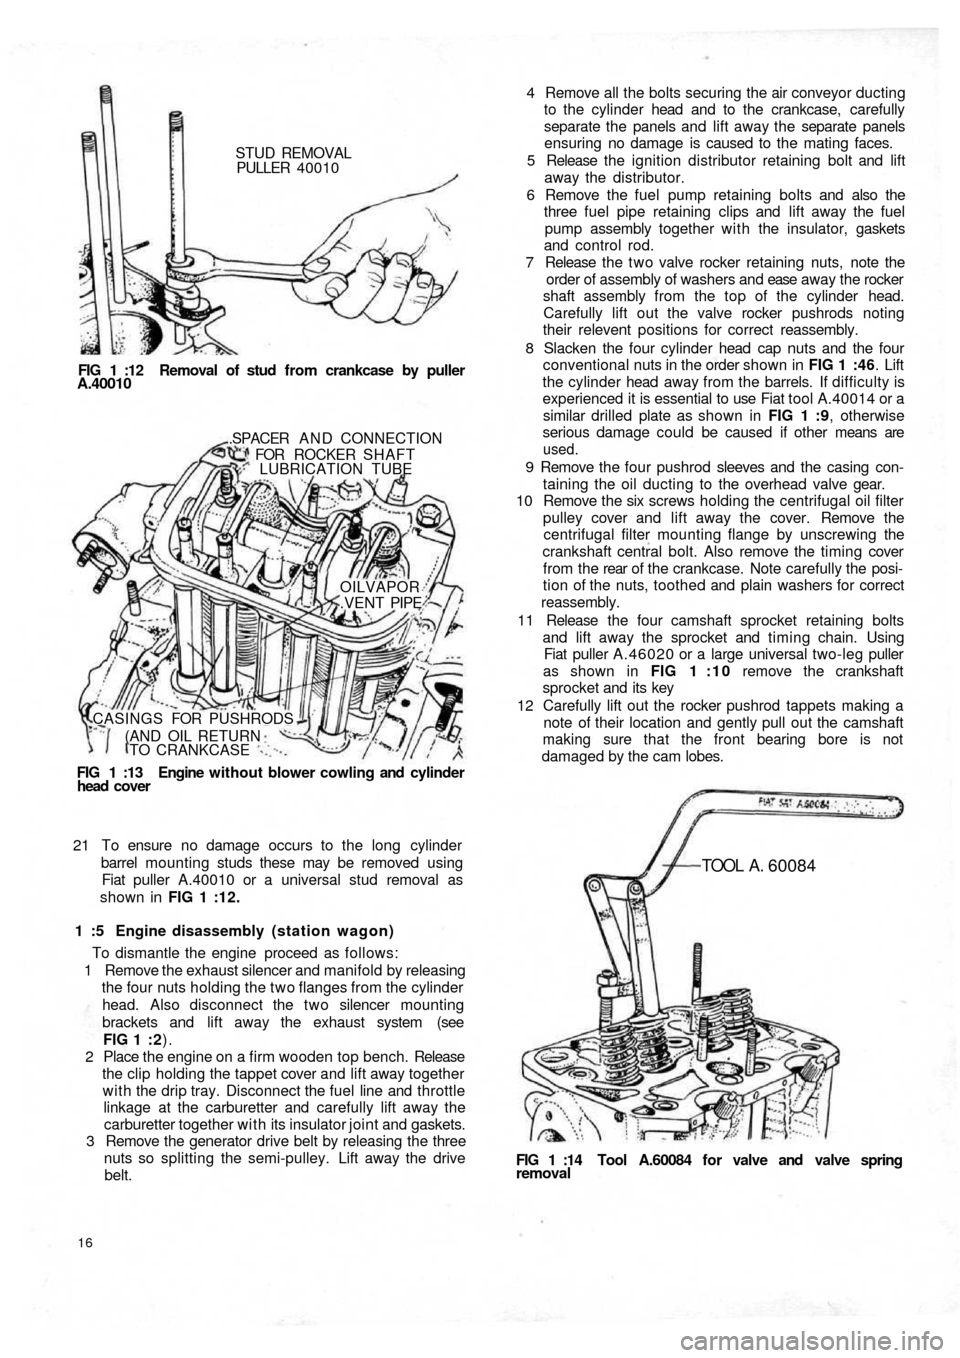 FIAT 500 1958 1.G Workshop Manual STUD REMOVAL
PULLER  40010
FIG 1 :12  Removal of stud from crankcase by puller
A.40010
FIG  1  :13   Engine  without blower cowling and cylinder
head  cover.SPACER  A N D  CONNECTION
FOR ROCKER SHAFT
